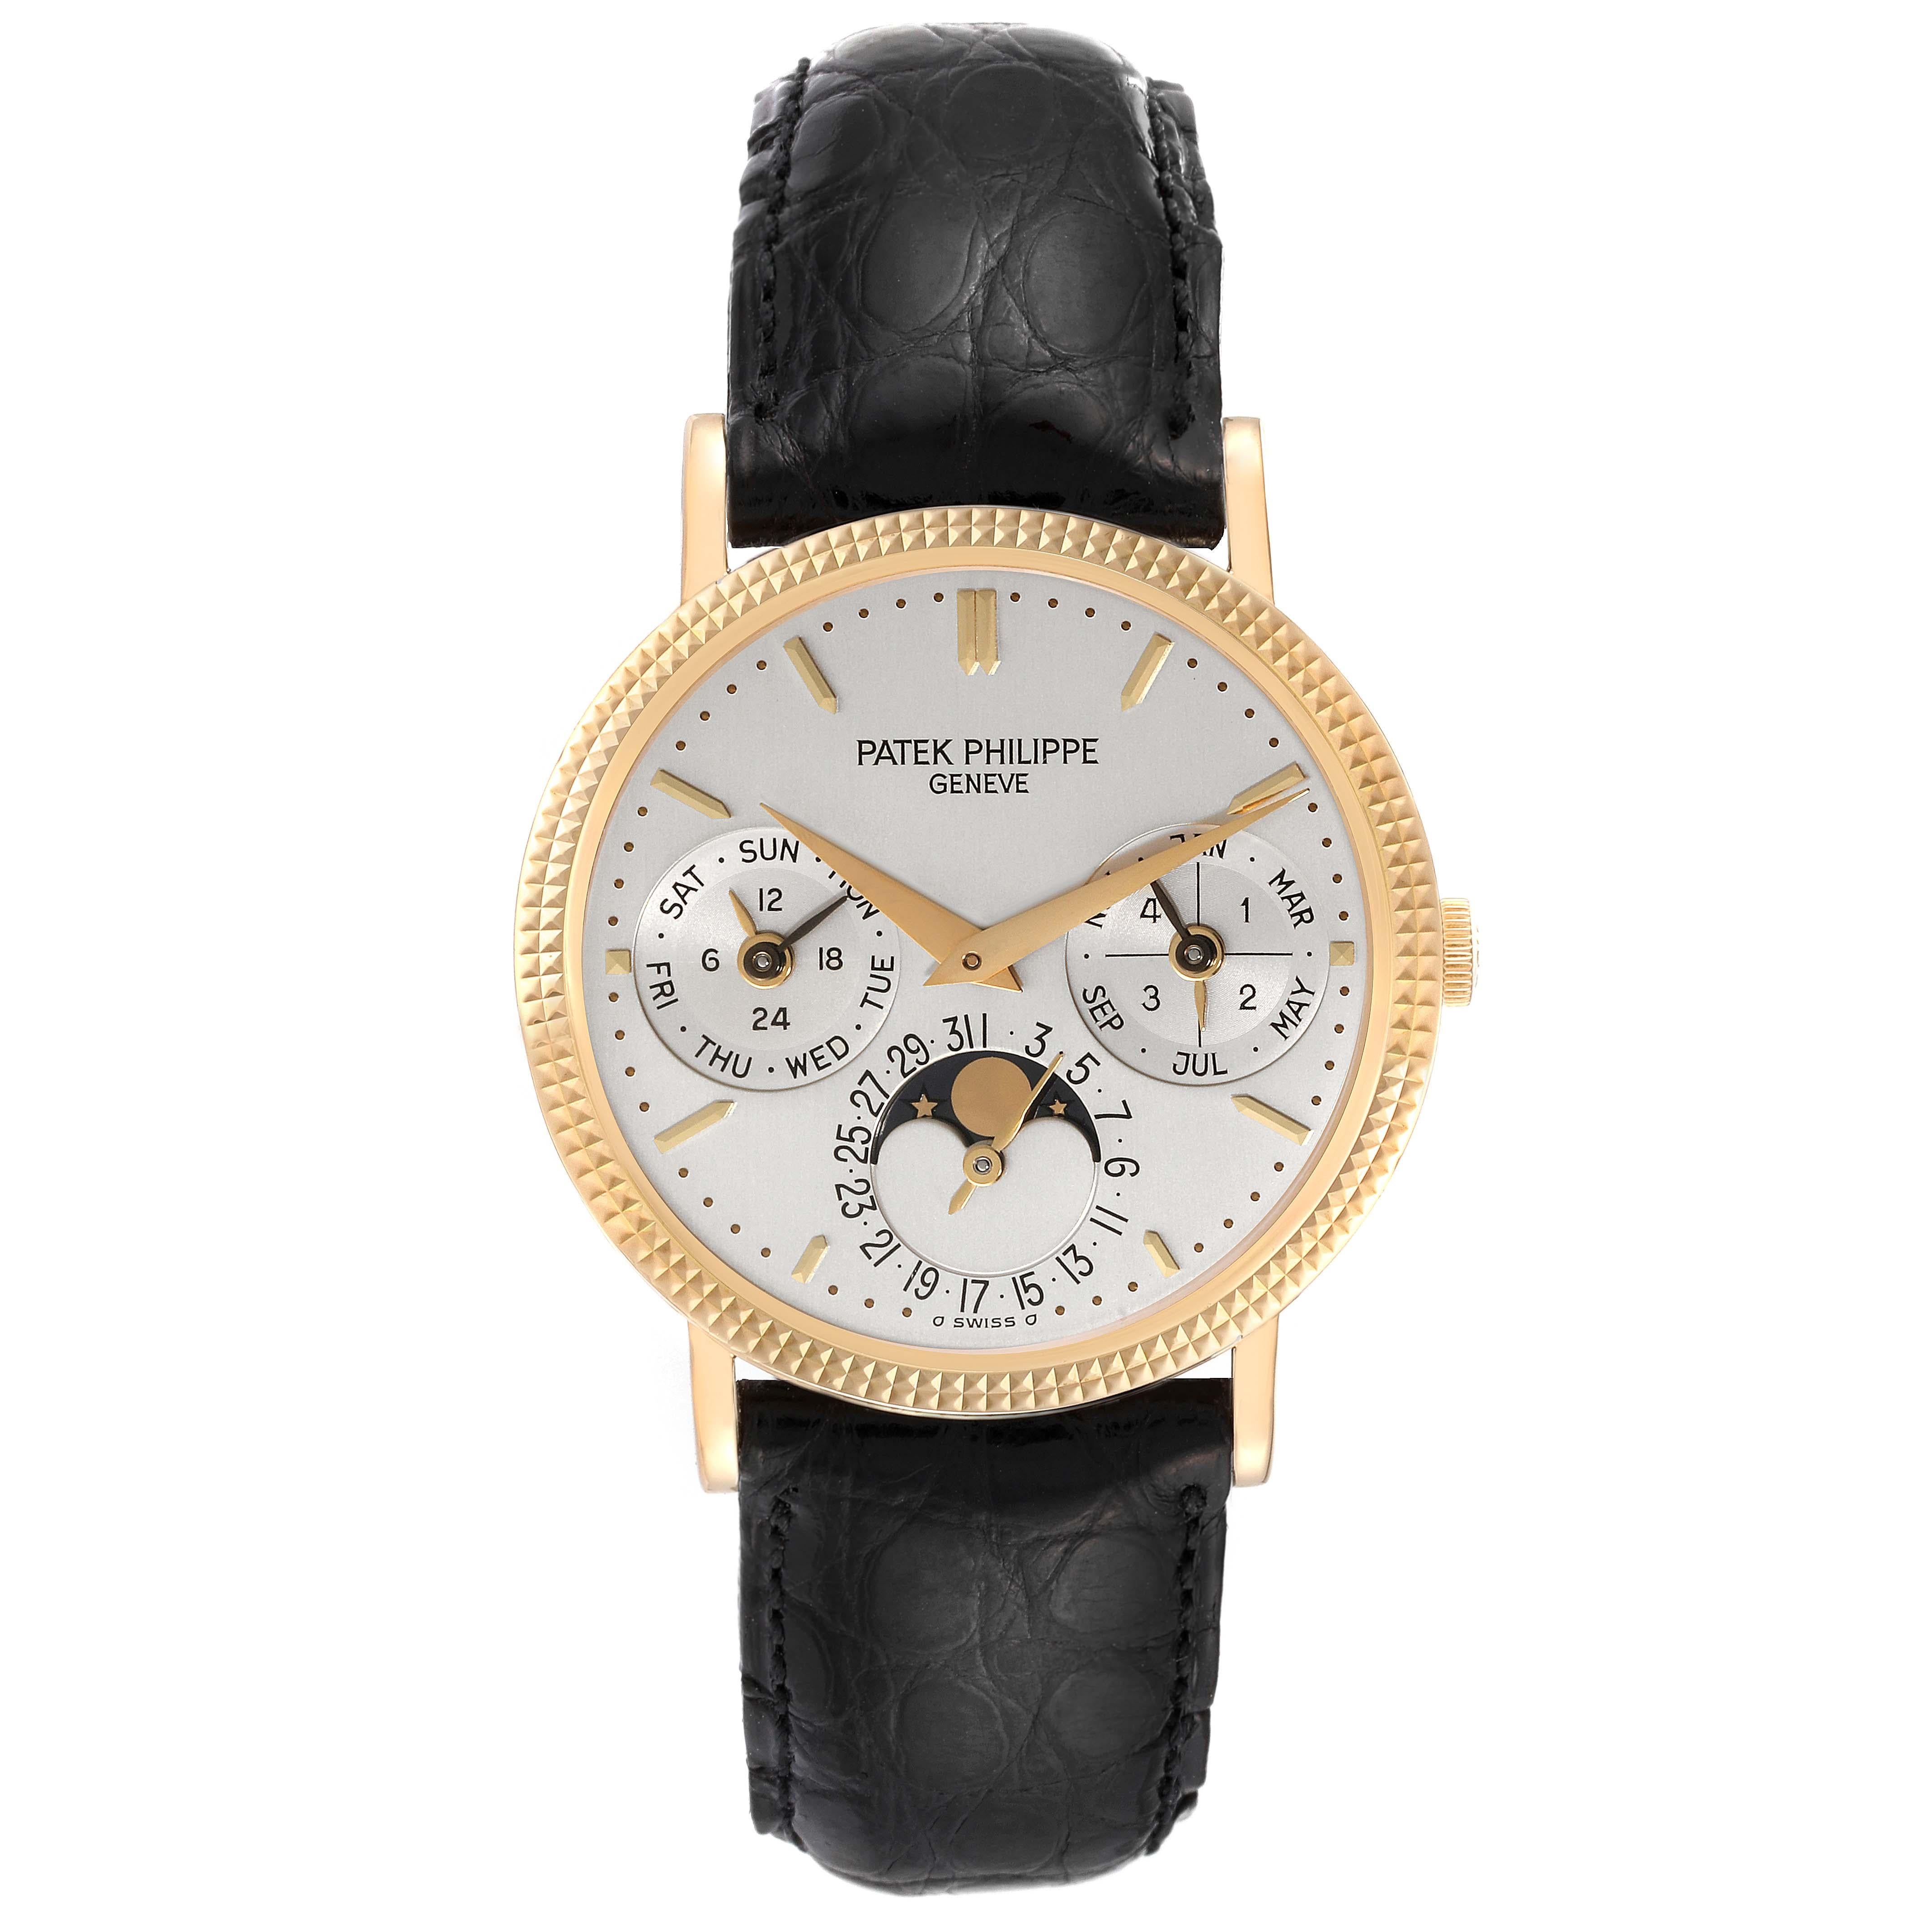 Patek Philippe Perpetual Calendar Yellow Gold Mens Watch 5039. Automatic self-winding  movement.  Perpetual calendar complication displaying the Day, month, date, moon phase, leap year and 24 hours. 18k yellow gold case 35 mm in diameter.